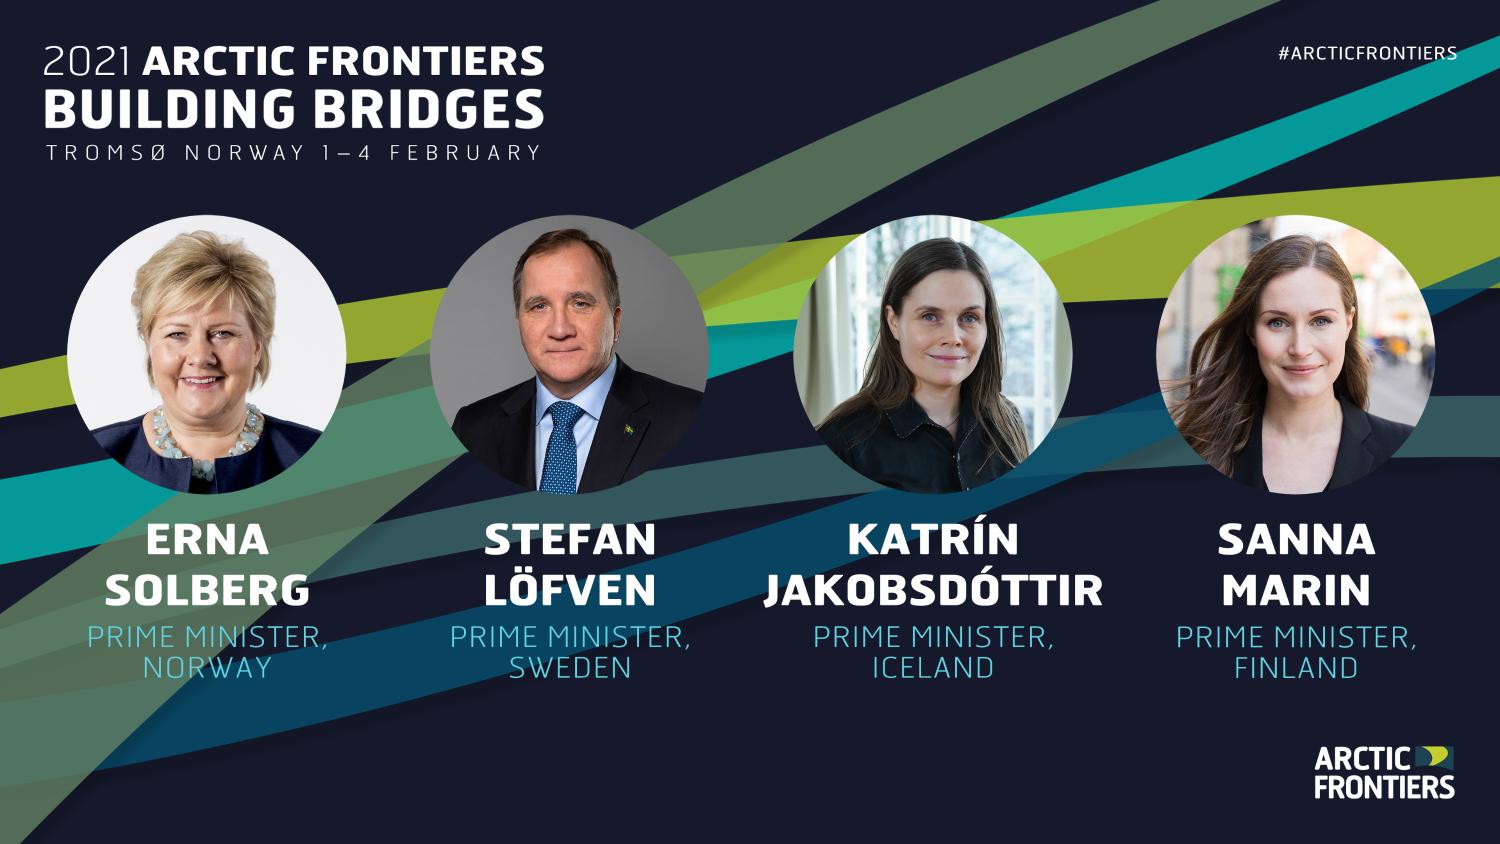 Prime Minister Sanna Marin speaks at Arctic Frontiers conference on 4 February 2021